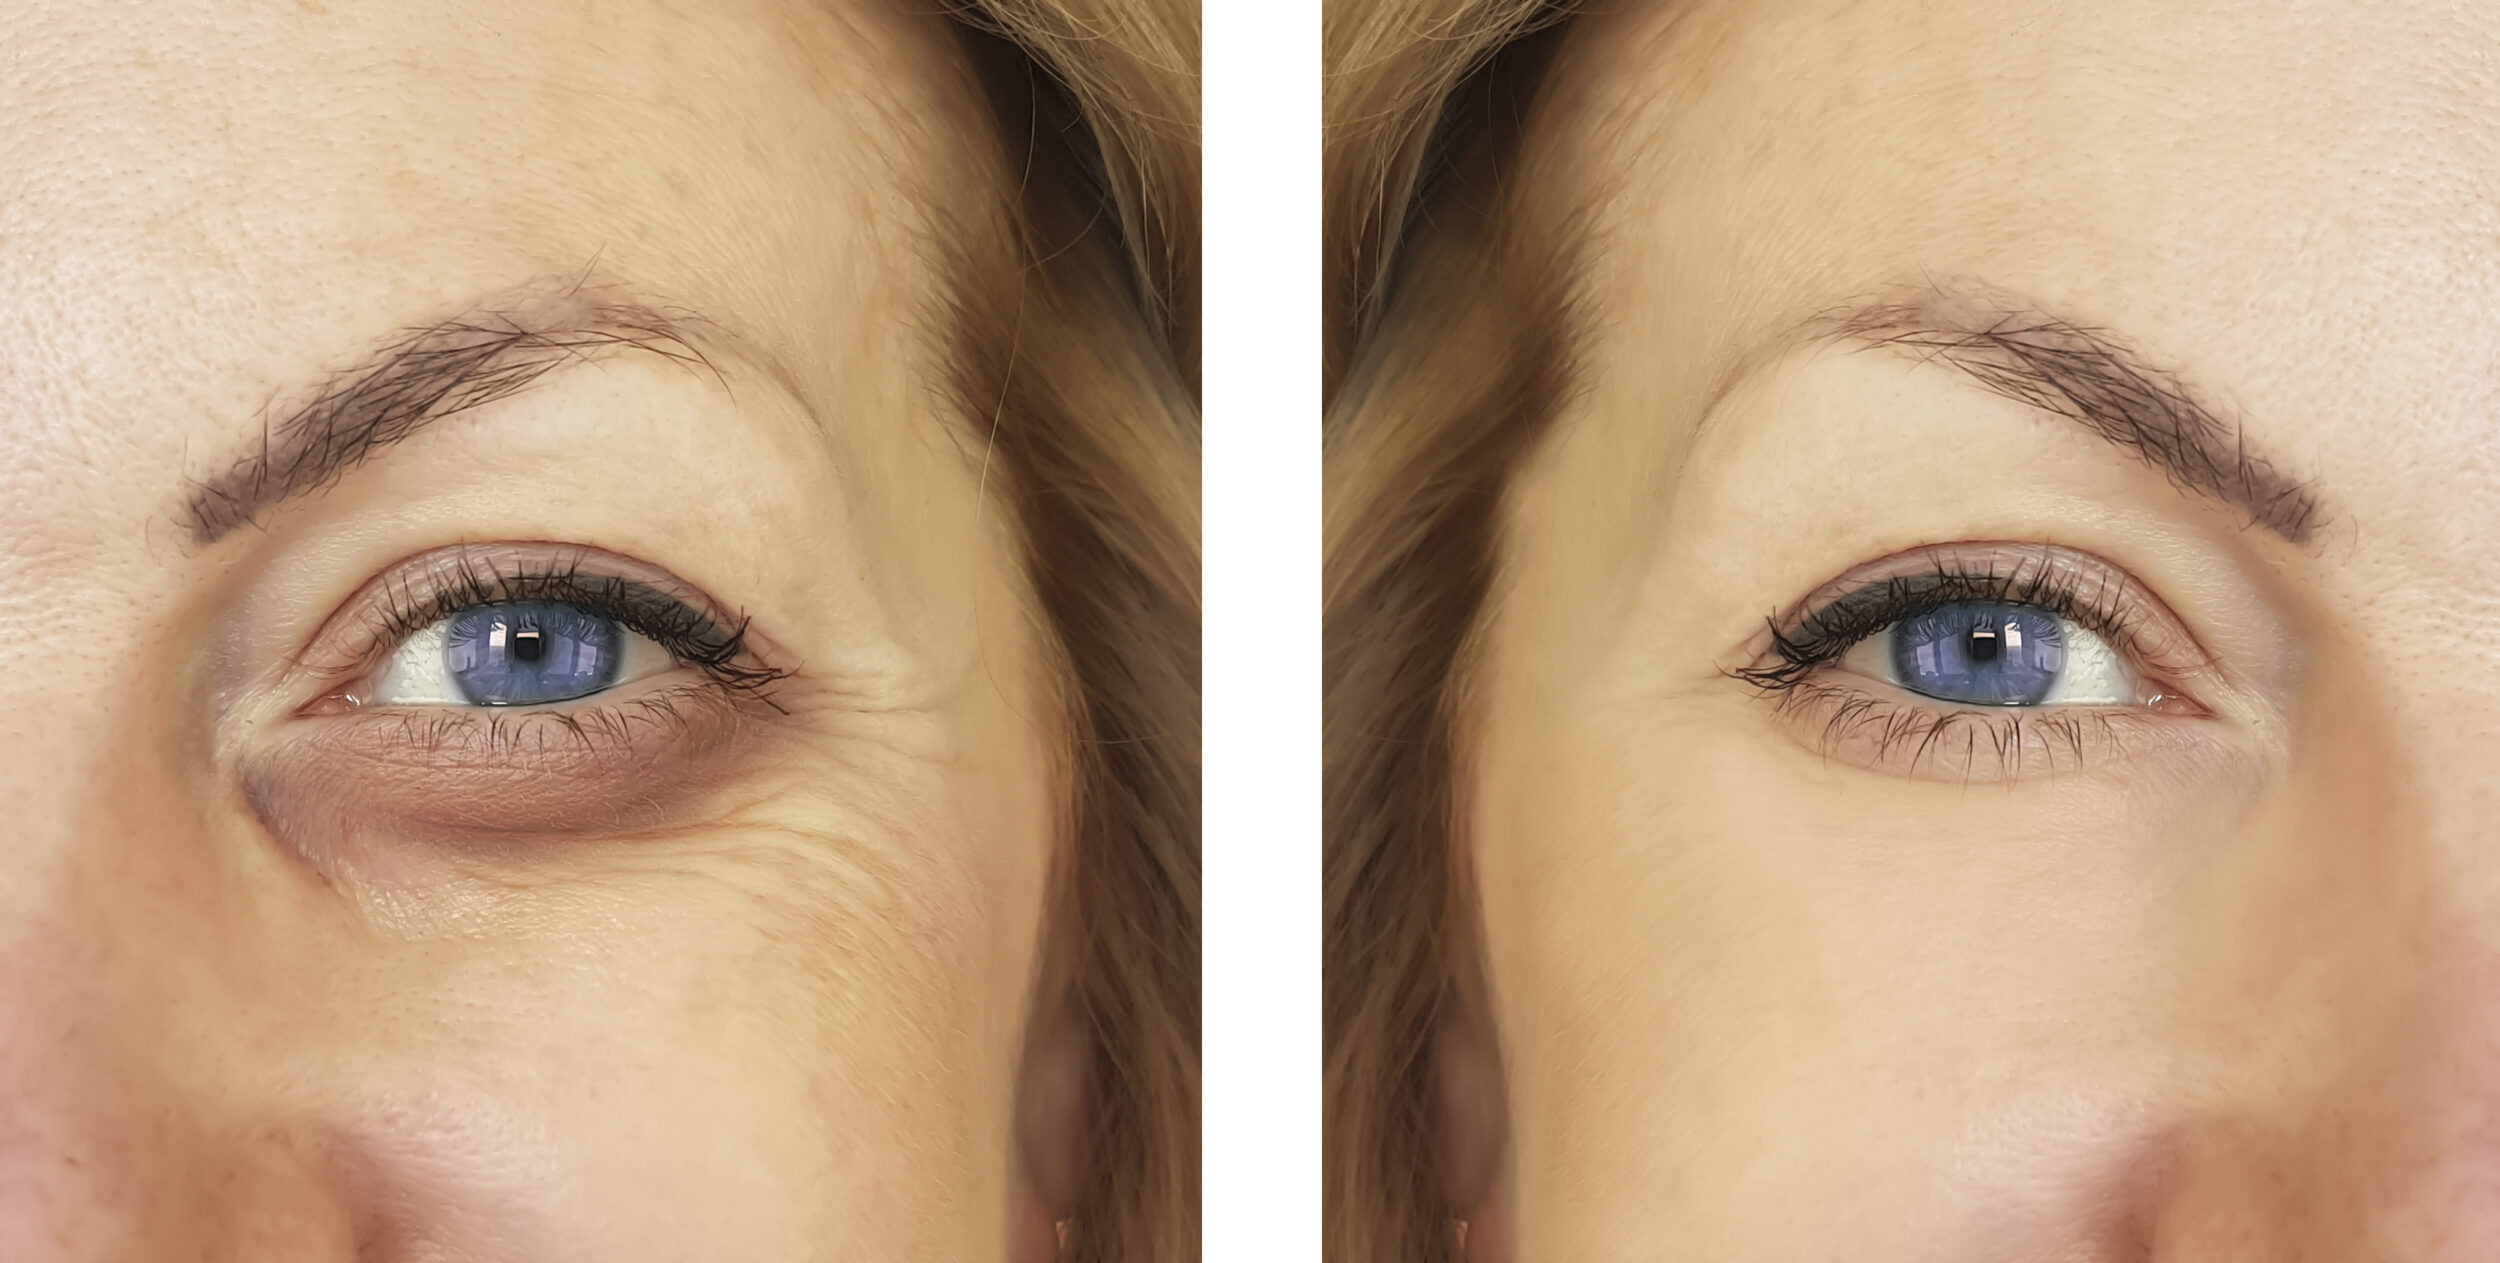 woman, eye swollen before and after procedures, treatm